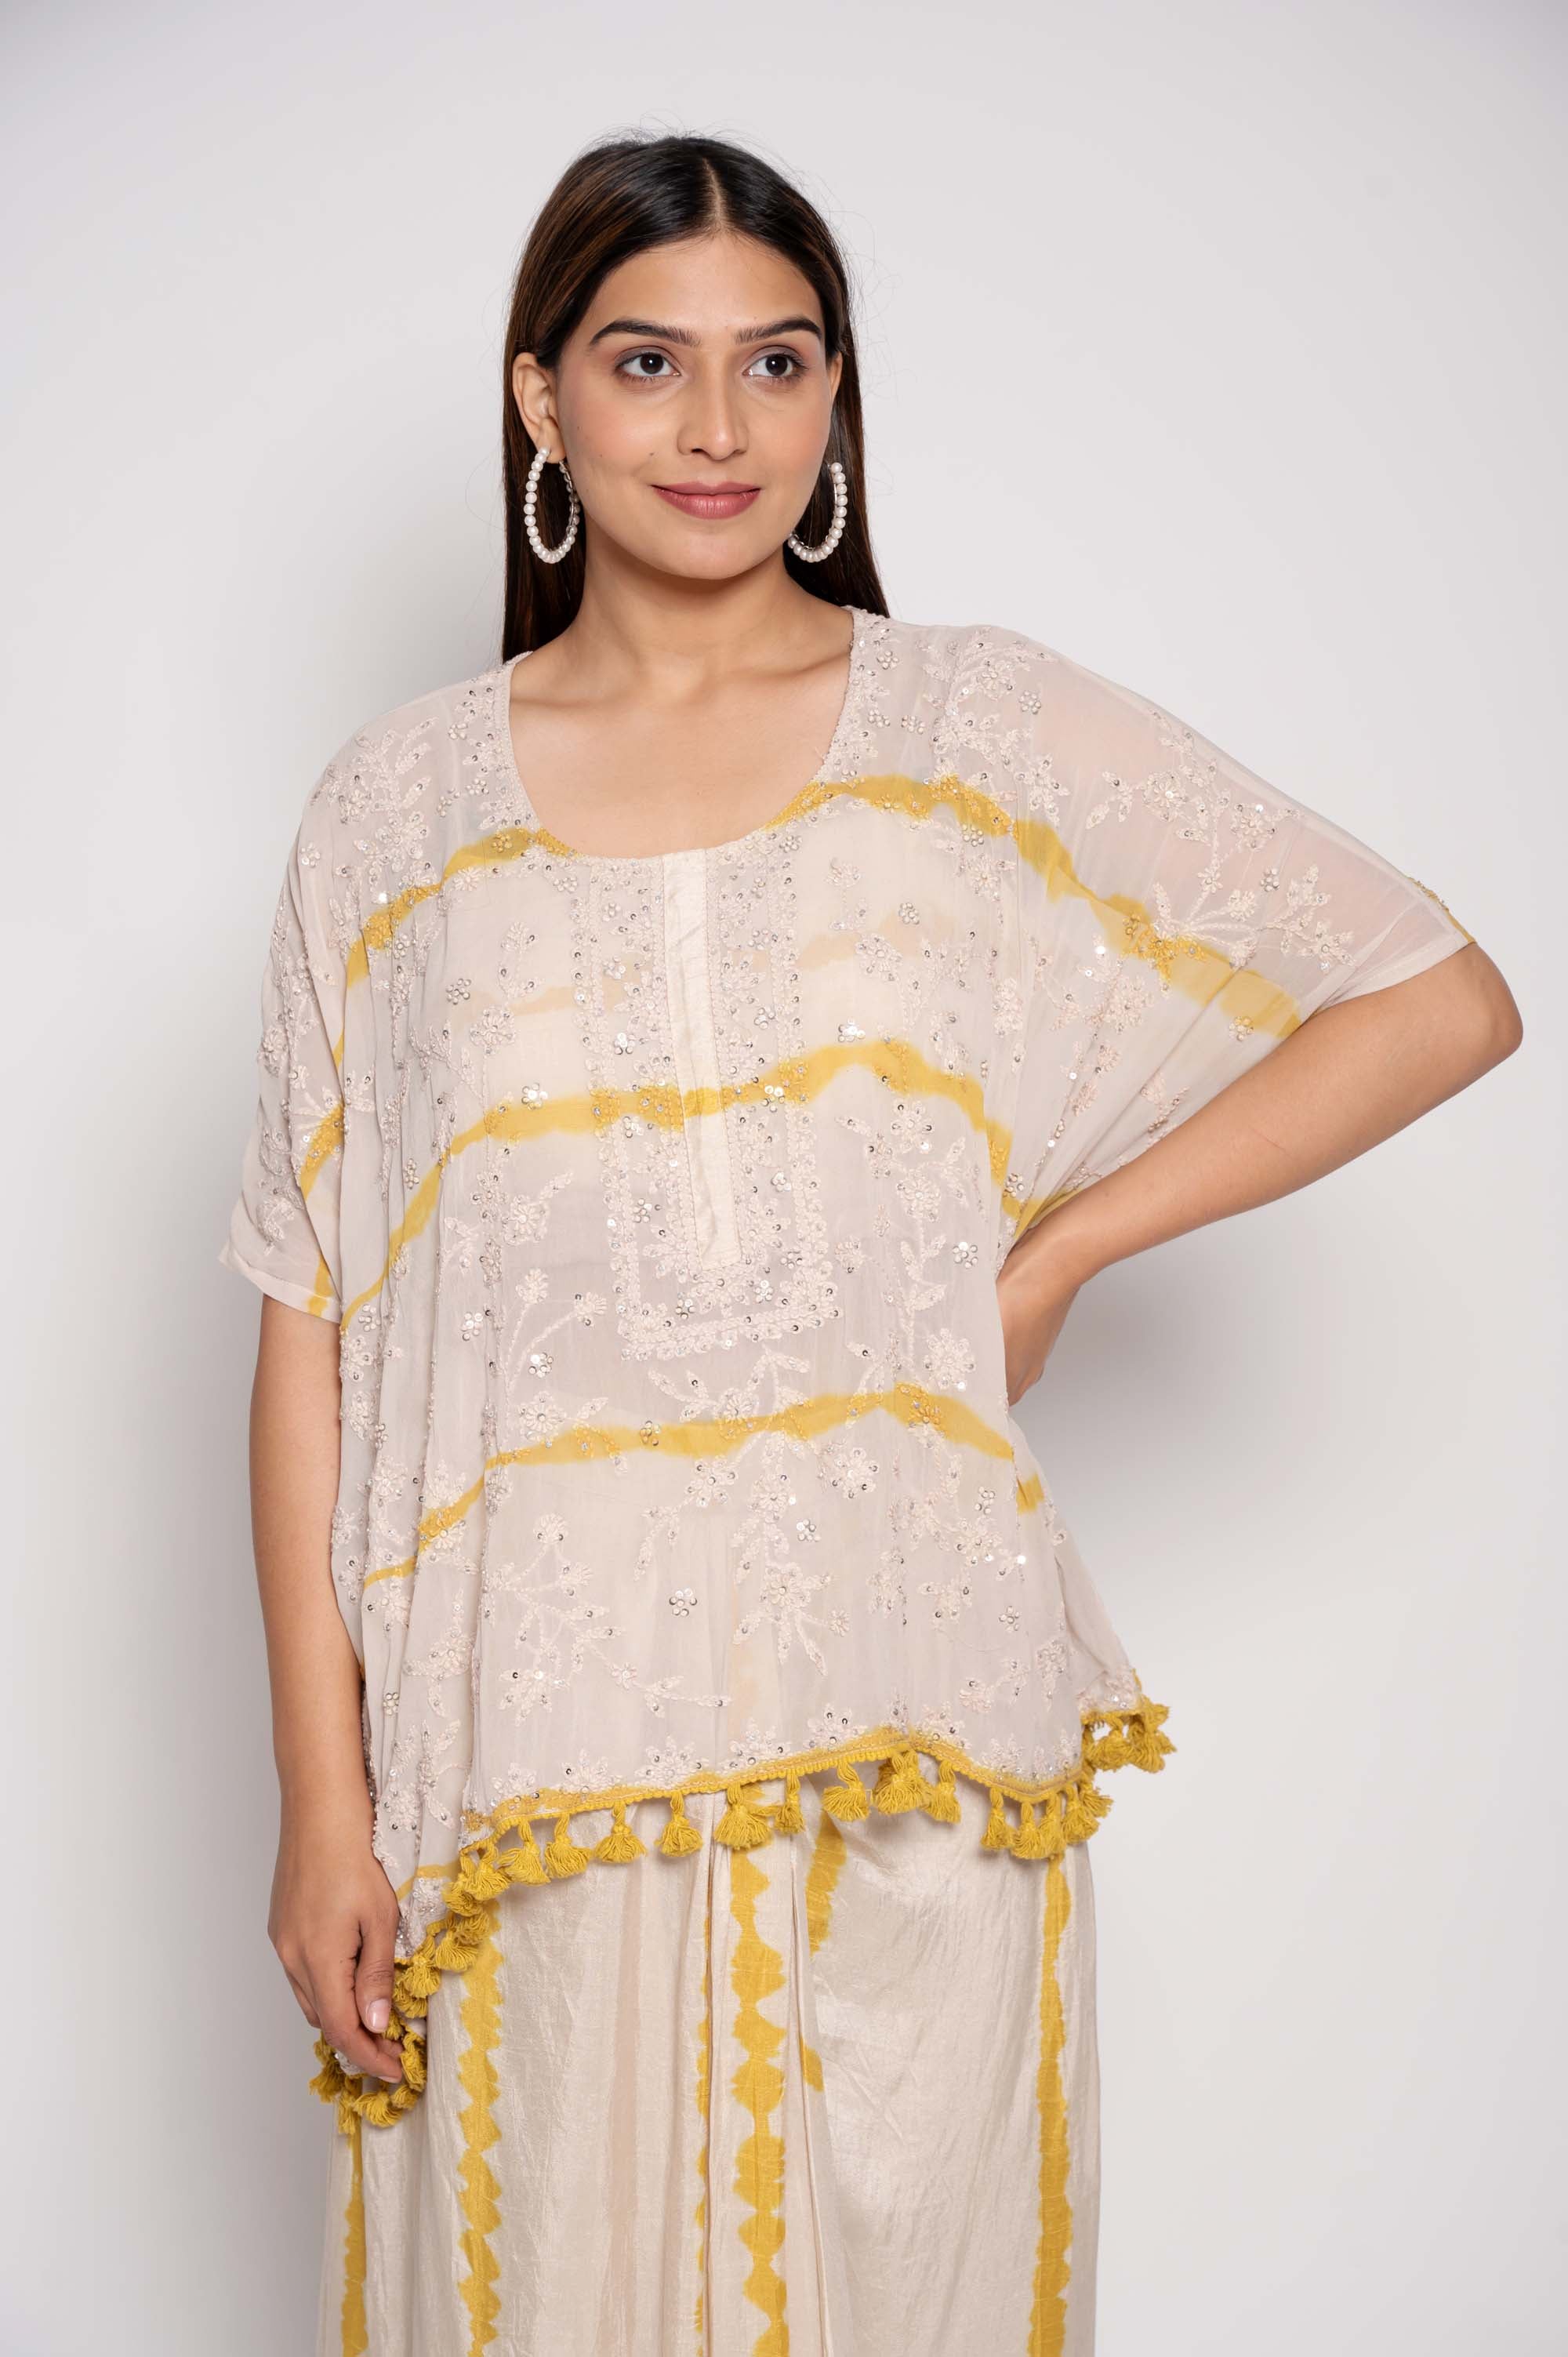 Kantha & Sequined Kaftan Top & Dhoti Style Coord Set